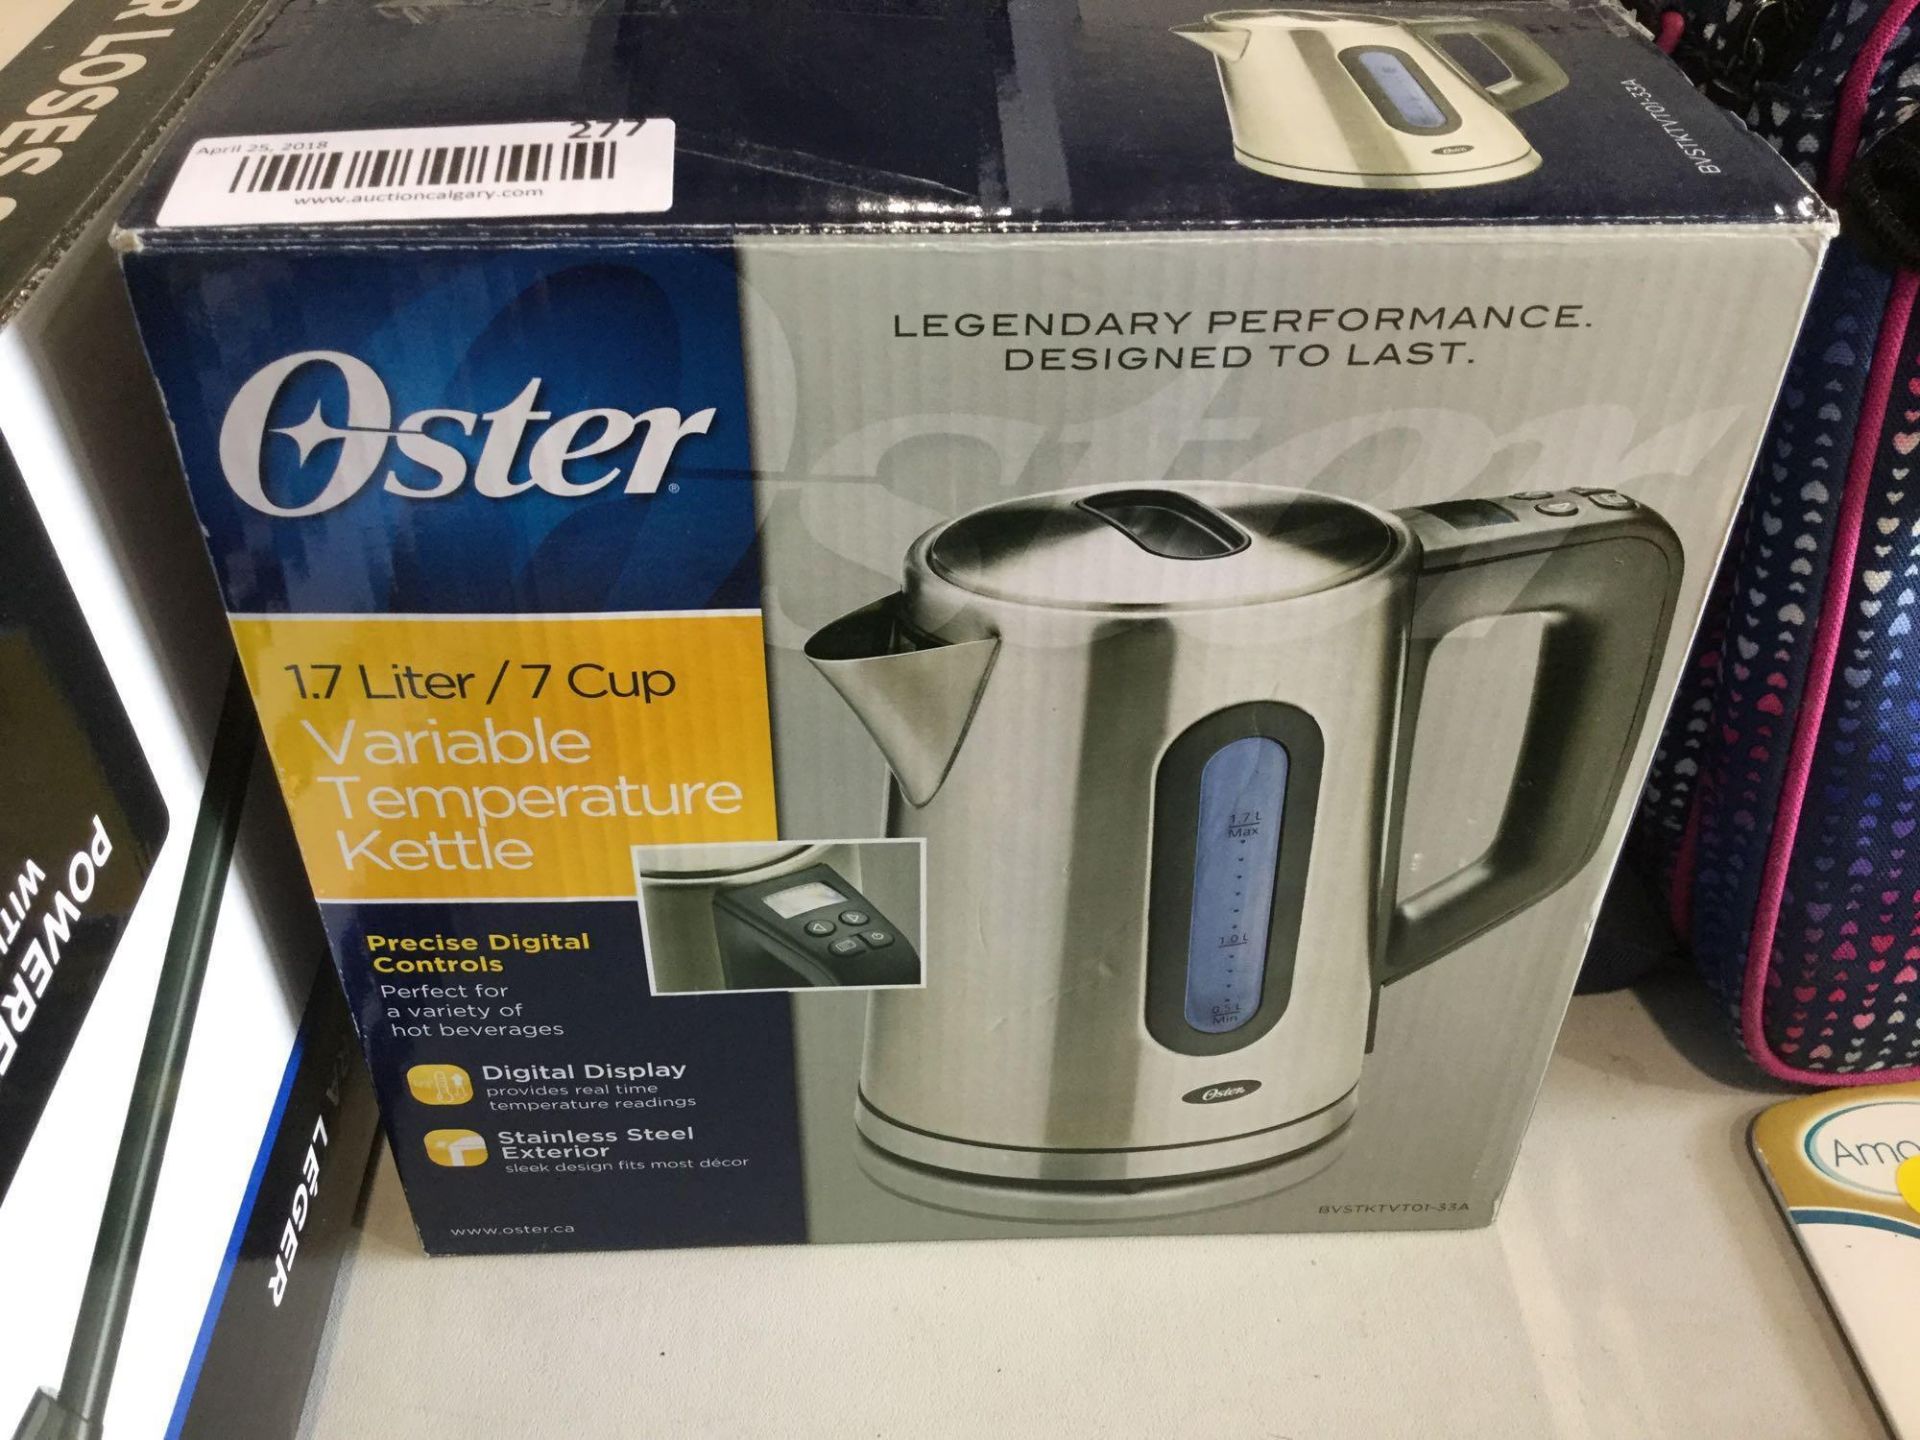 Oster 1.7ltr Variable temperature kettle